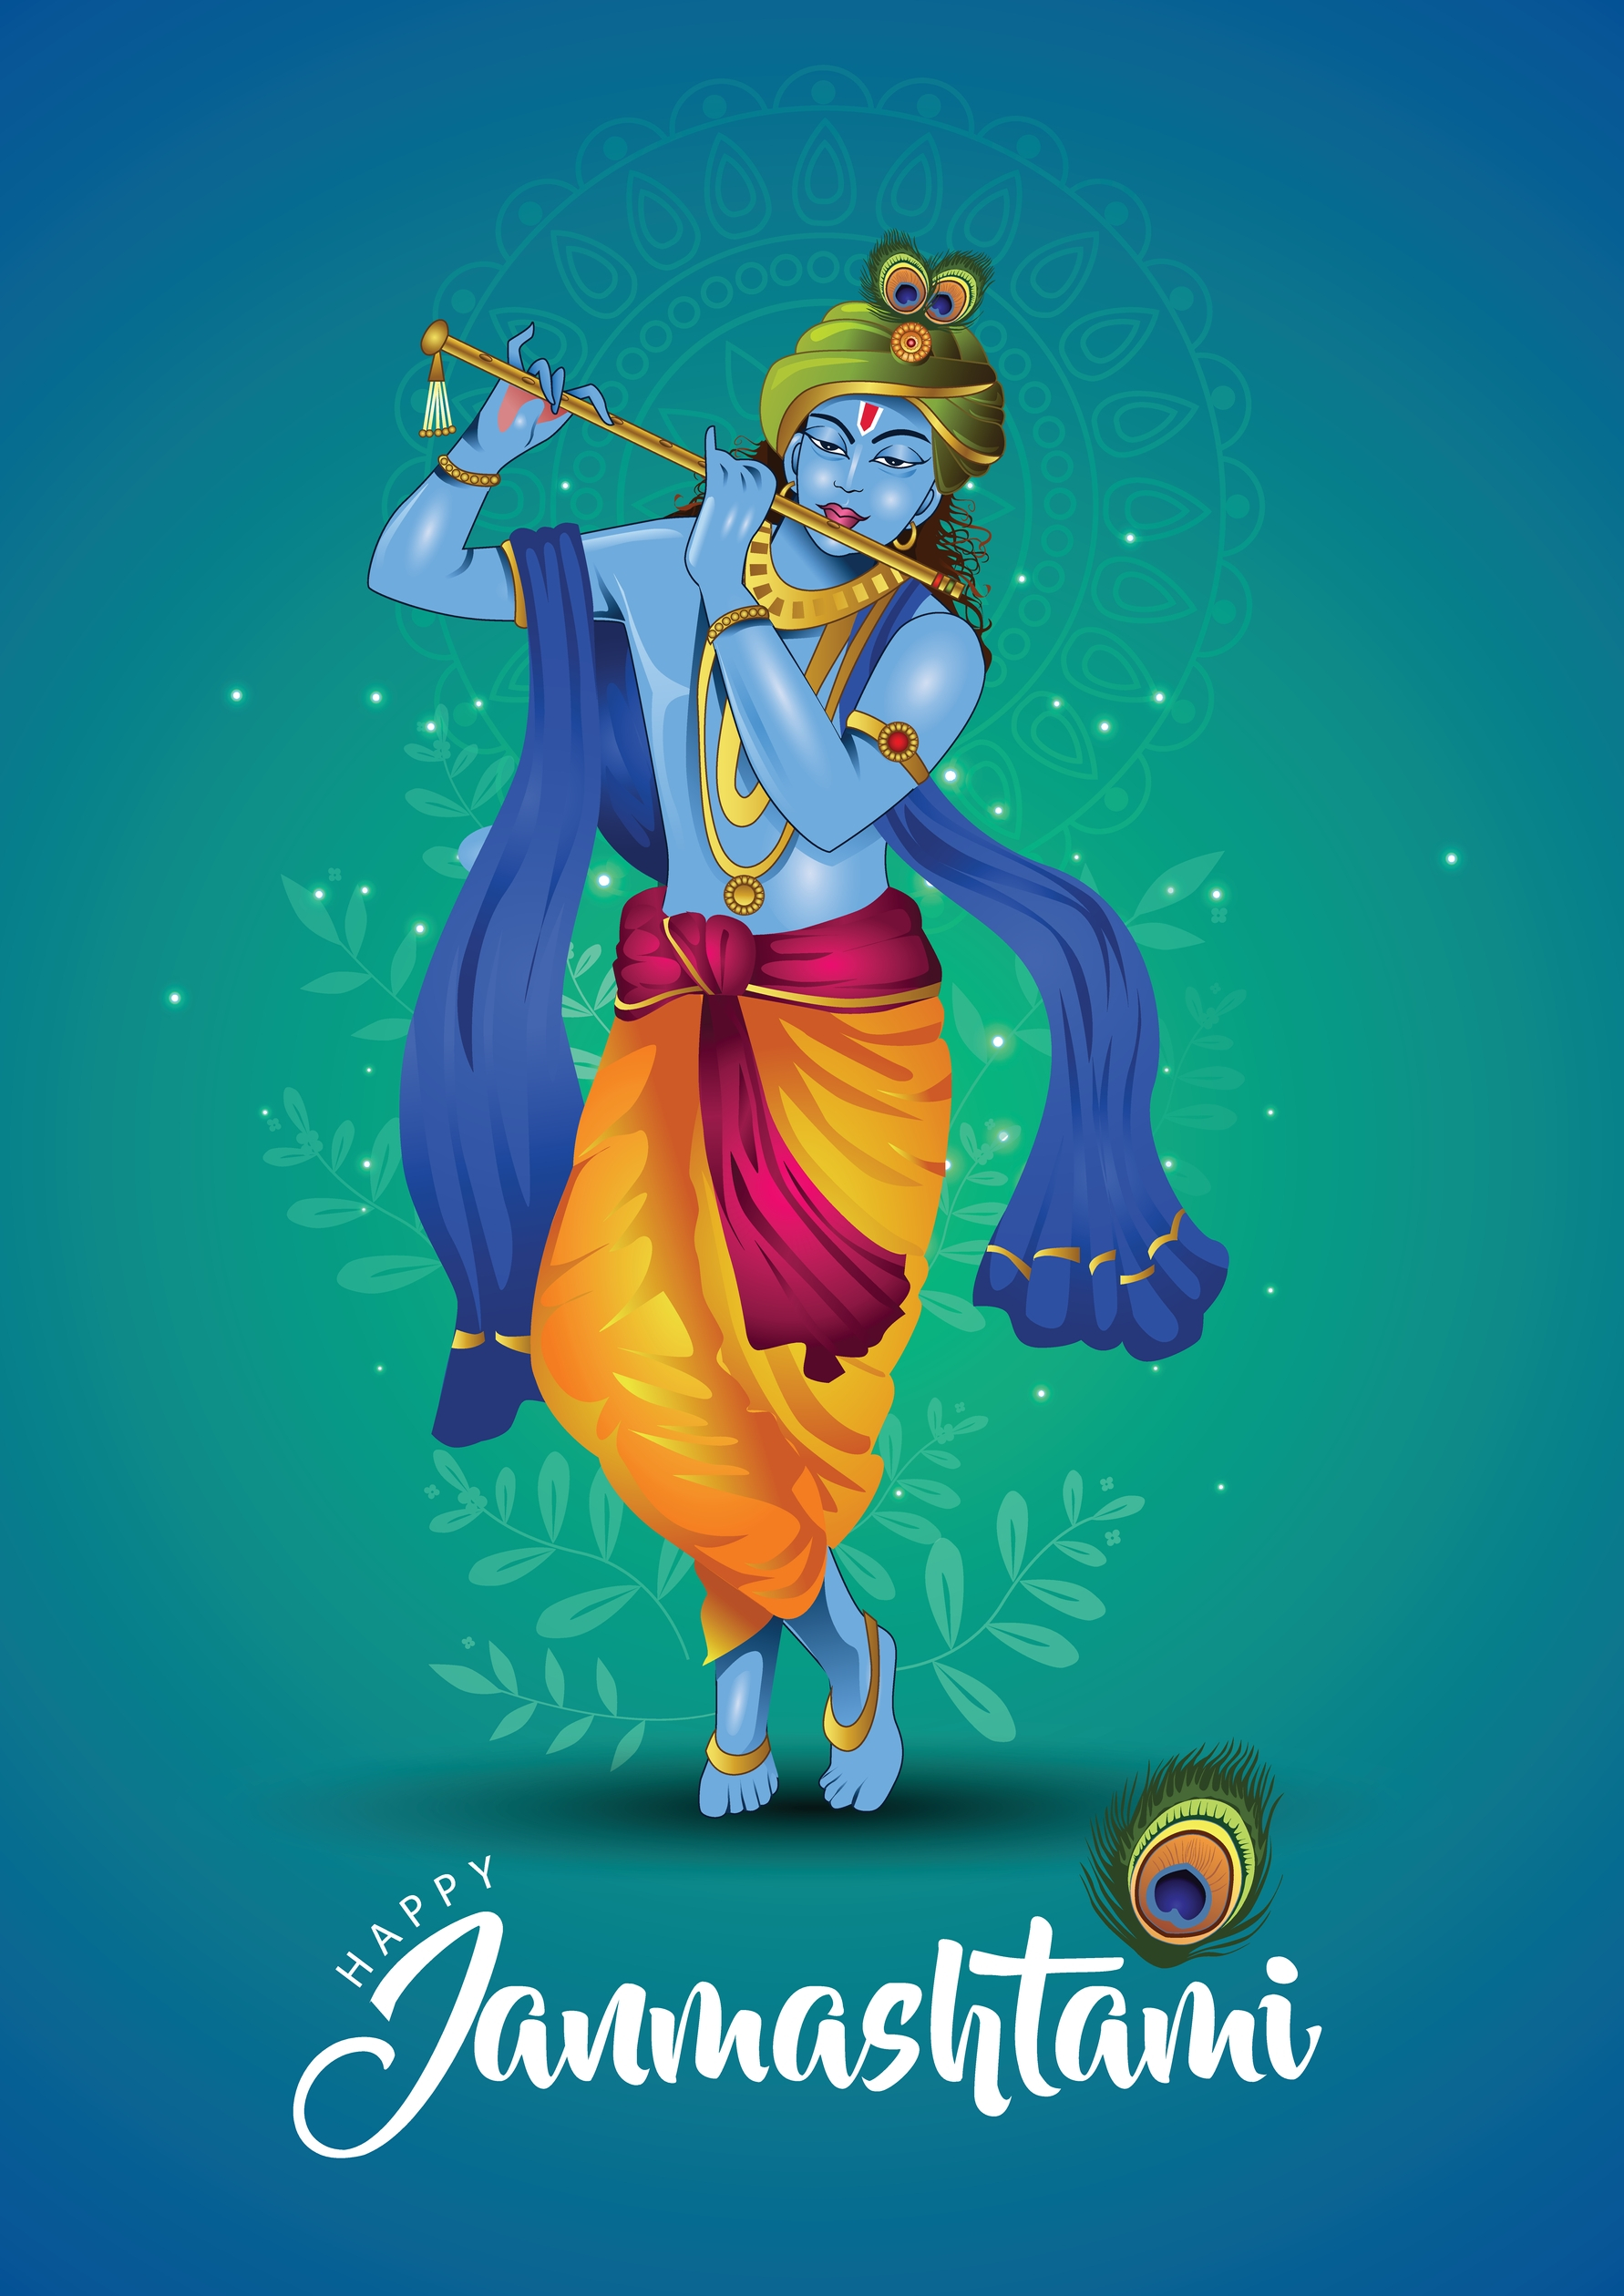 Happy Krishna Janmashtami 2023 75 Wishes Messages Images Quotes And Whatsapp Greetings In 8357